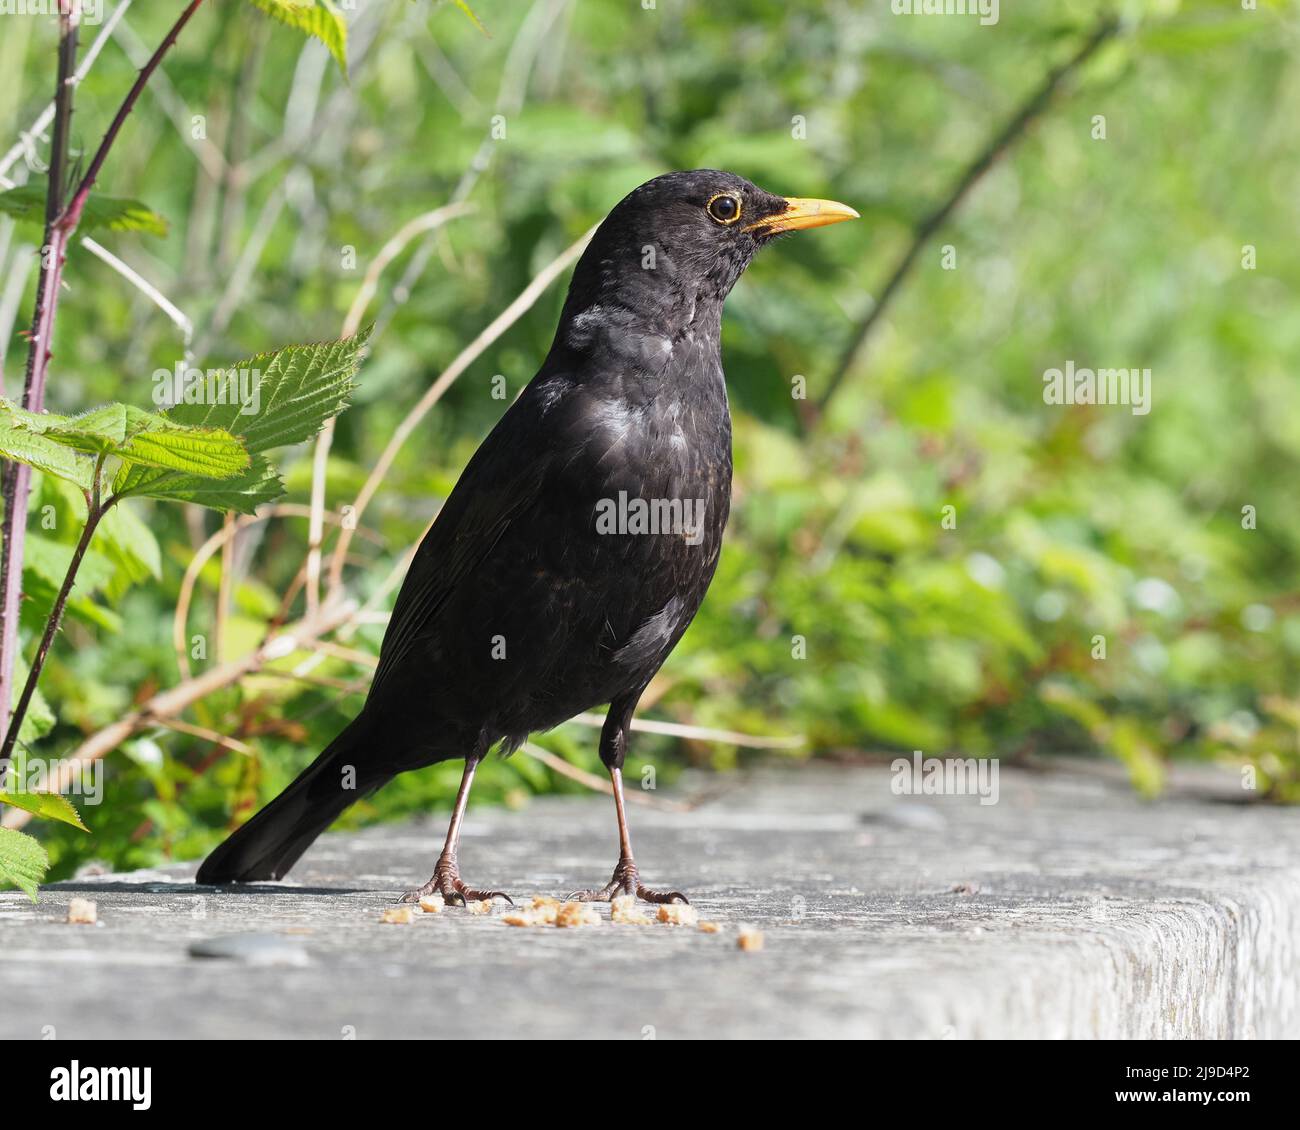 Close up of an adult male Blackbird, Turdus merula, standing on a wall next to green foliage, on a bright sunny day. Stock Photo